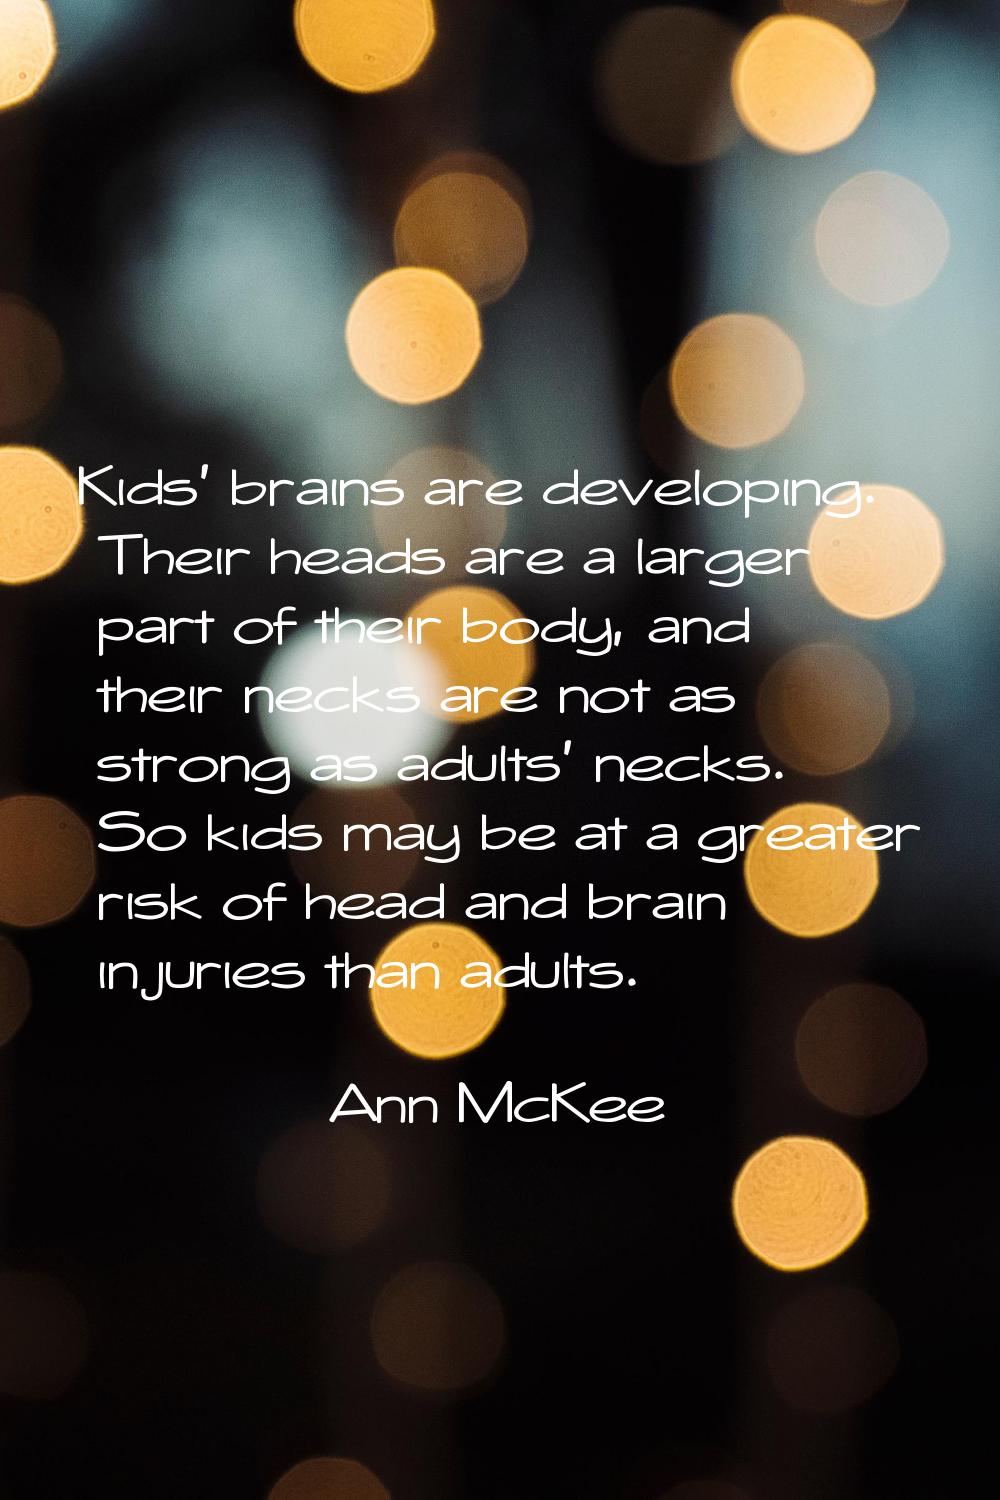 Kids' brains are developing. Their heads are a larger part of their body, and their necks are not a